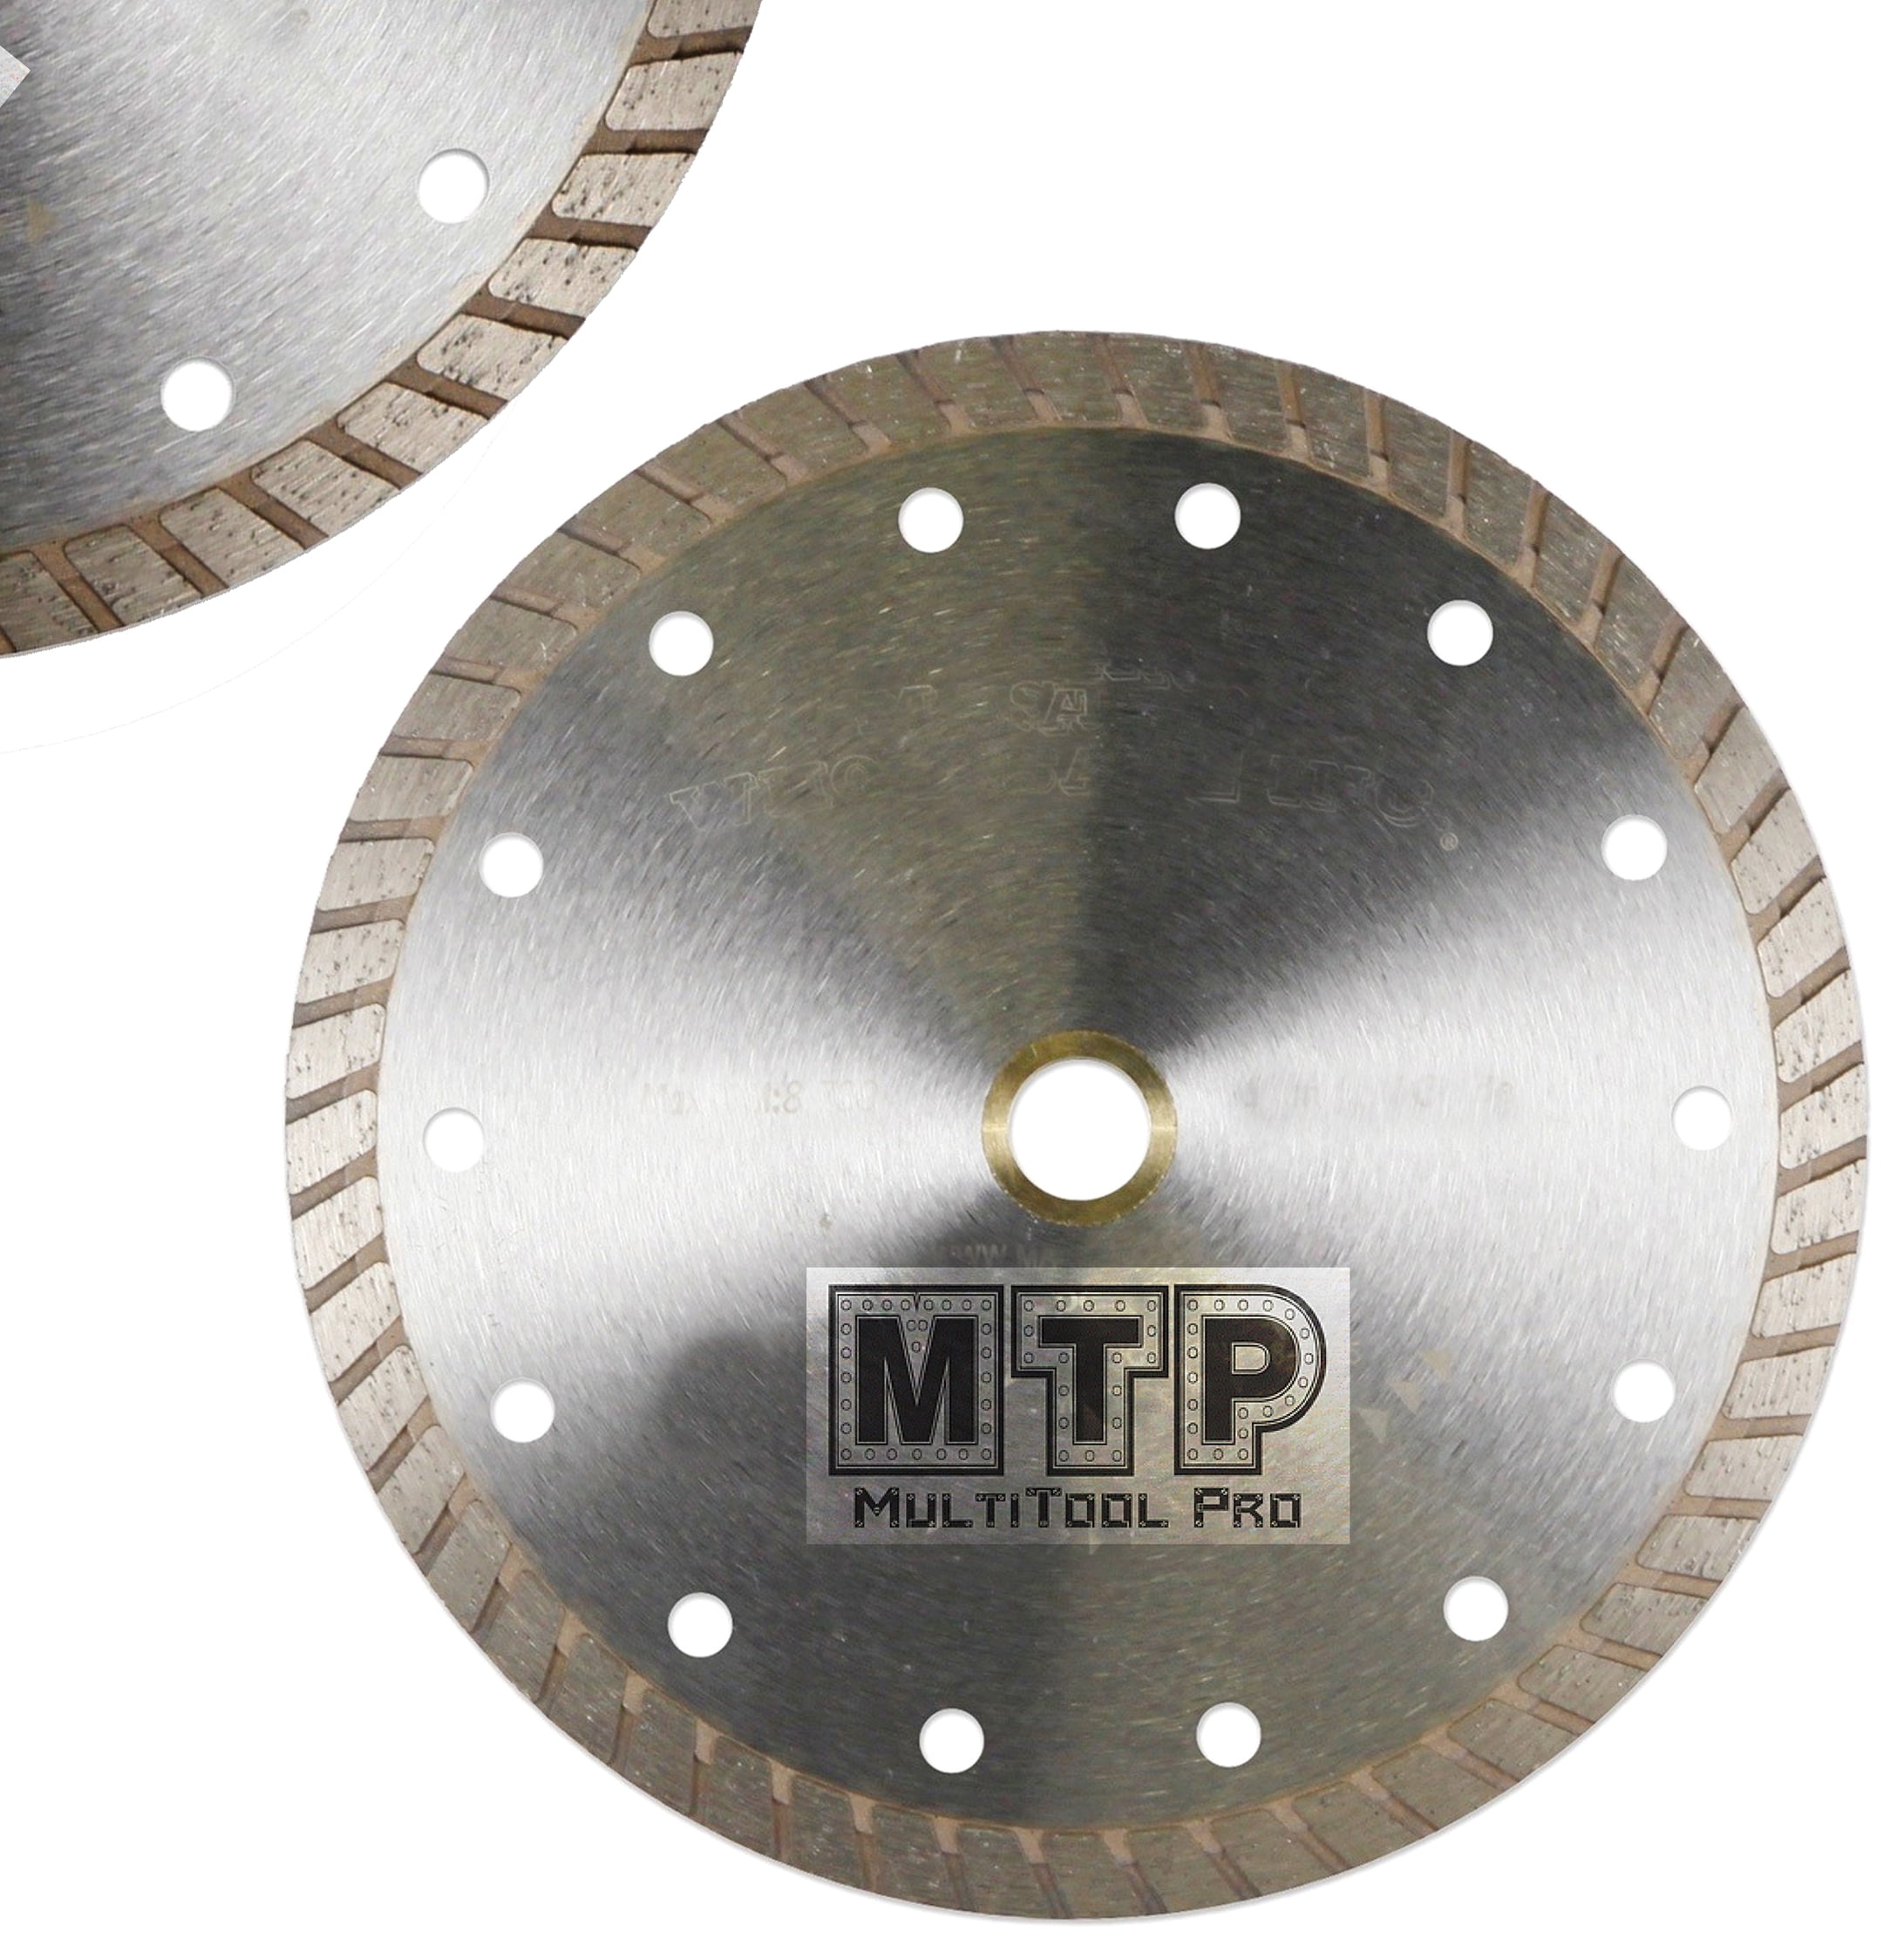 Diamond Saw Blade Continuous Turbo For Grinder concrete Granite wet Dry Cutting 